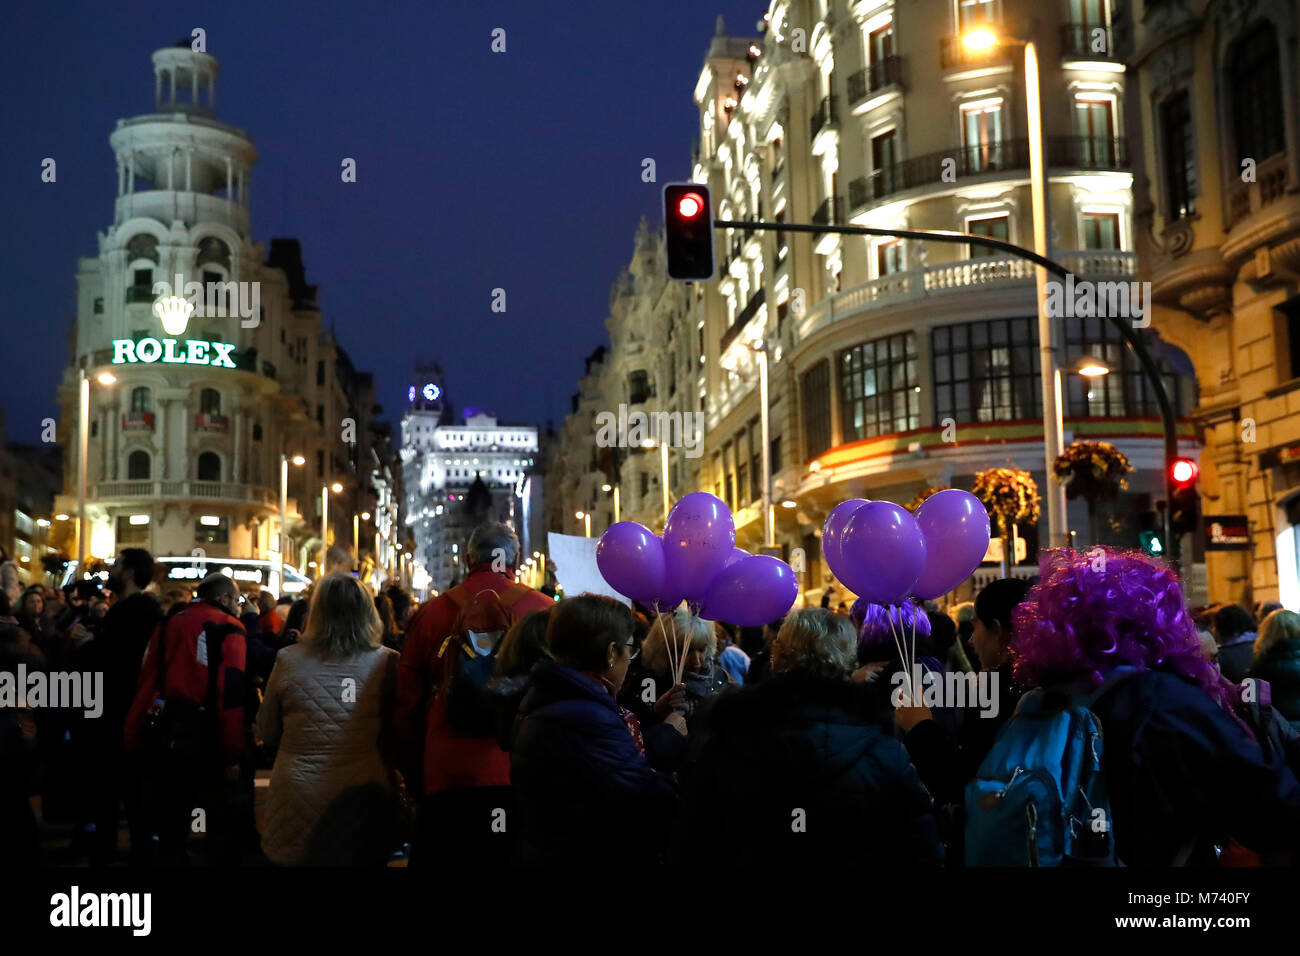 Spanish women during a gathering to celebrate International Women's Day in Puerta del Sol in Madrid, Madrid, Thursday March 8, 2018. Credit: Gtres Información más Comuniación on line, S.L./Alamy Live News Stock Photo